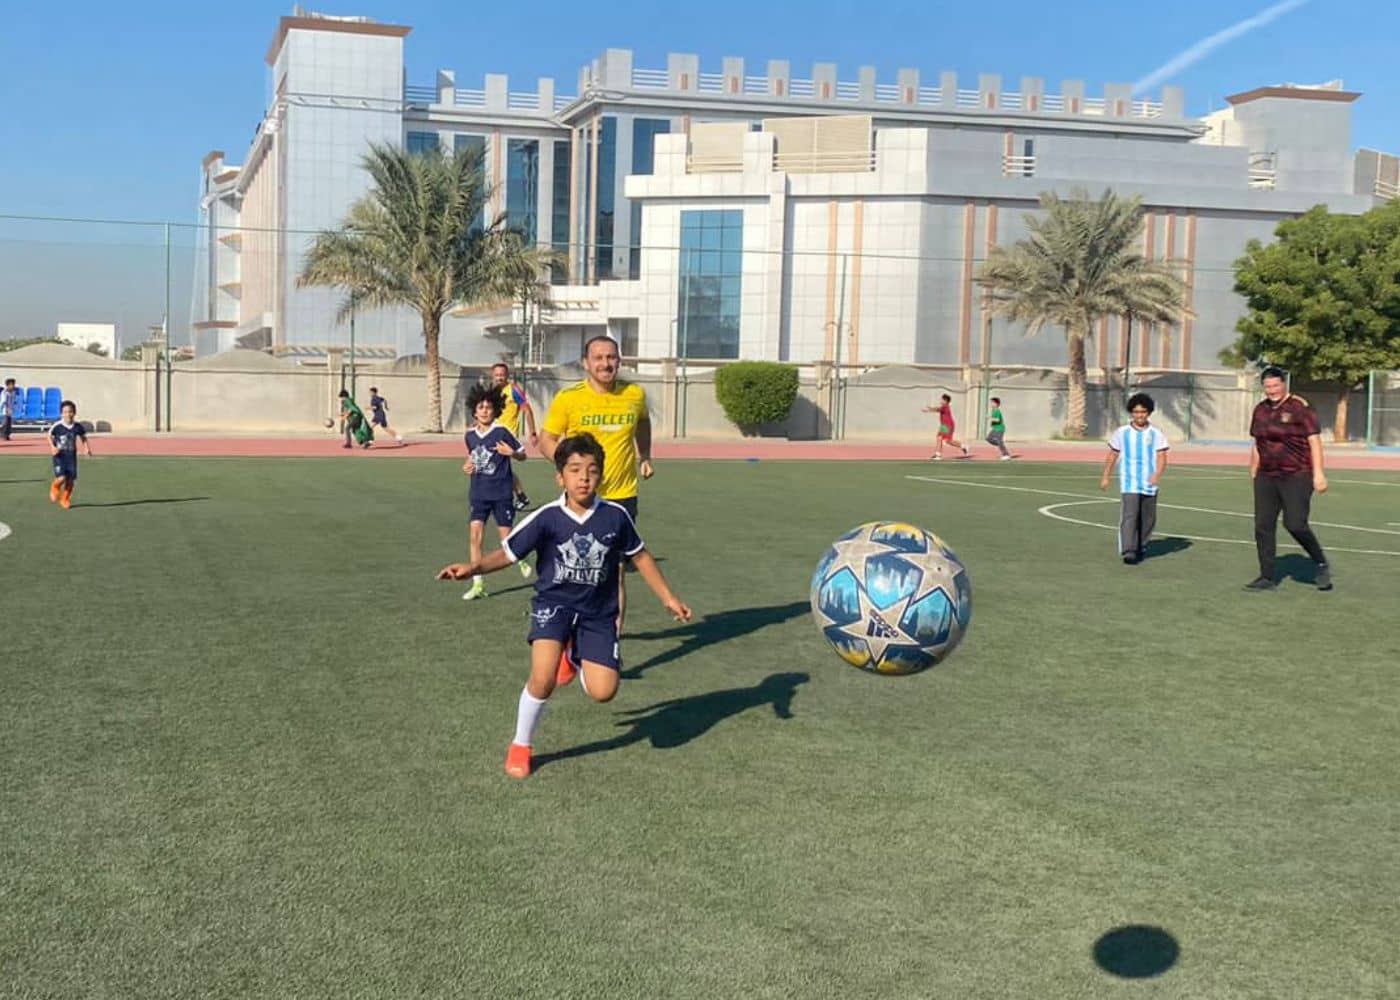 Students of Abu Dhabi International School at the Football event